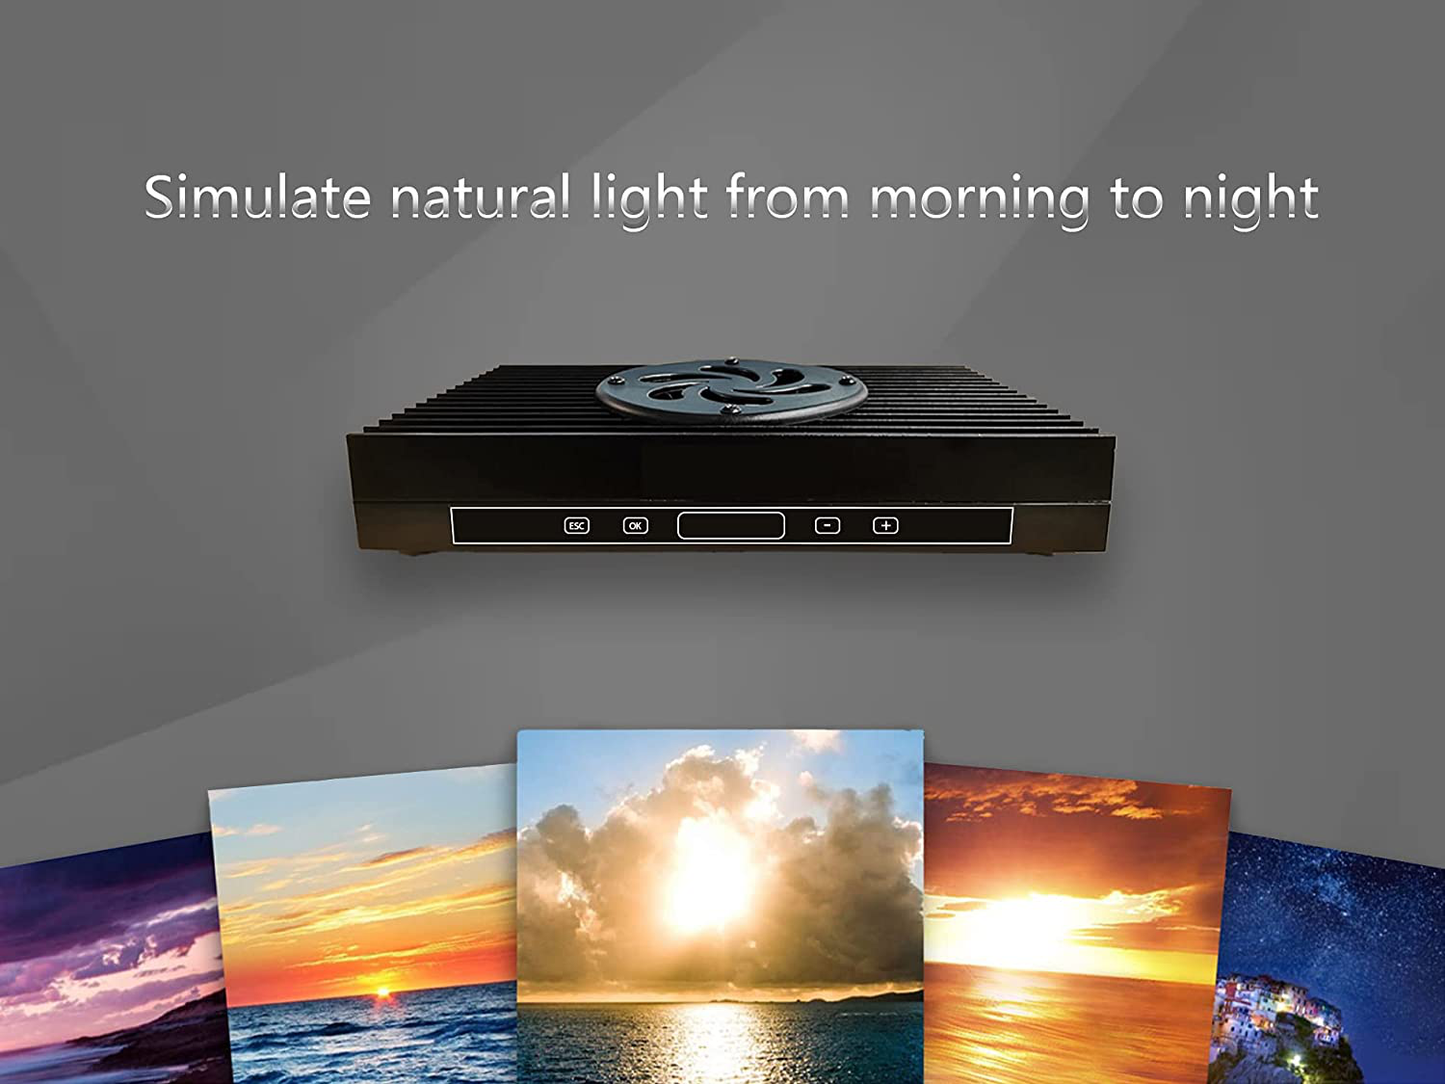 SMATFARM LED Aquarium Light - Updated Program Coral Reef Light Dimmable 95Watts (±5%) Full Spectrum Sunrise Sunset for Marine Fish Tanks Coral Reef Lamp with Timer Function